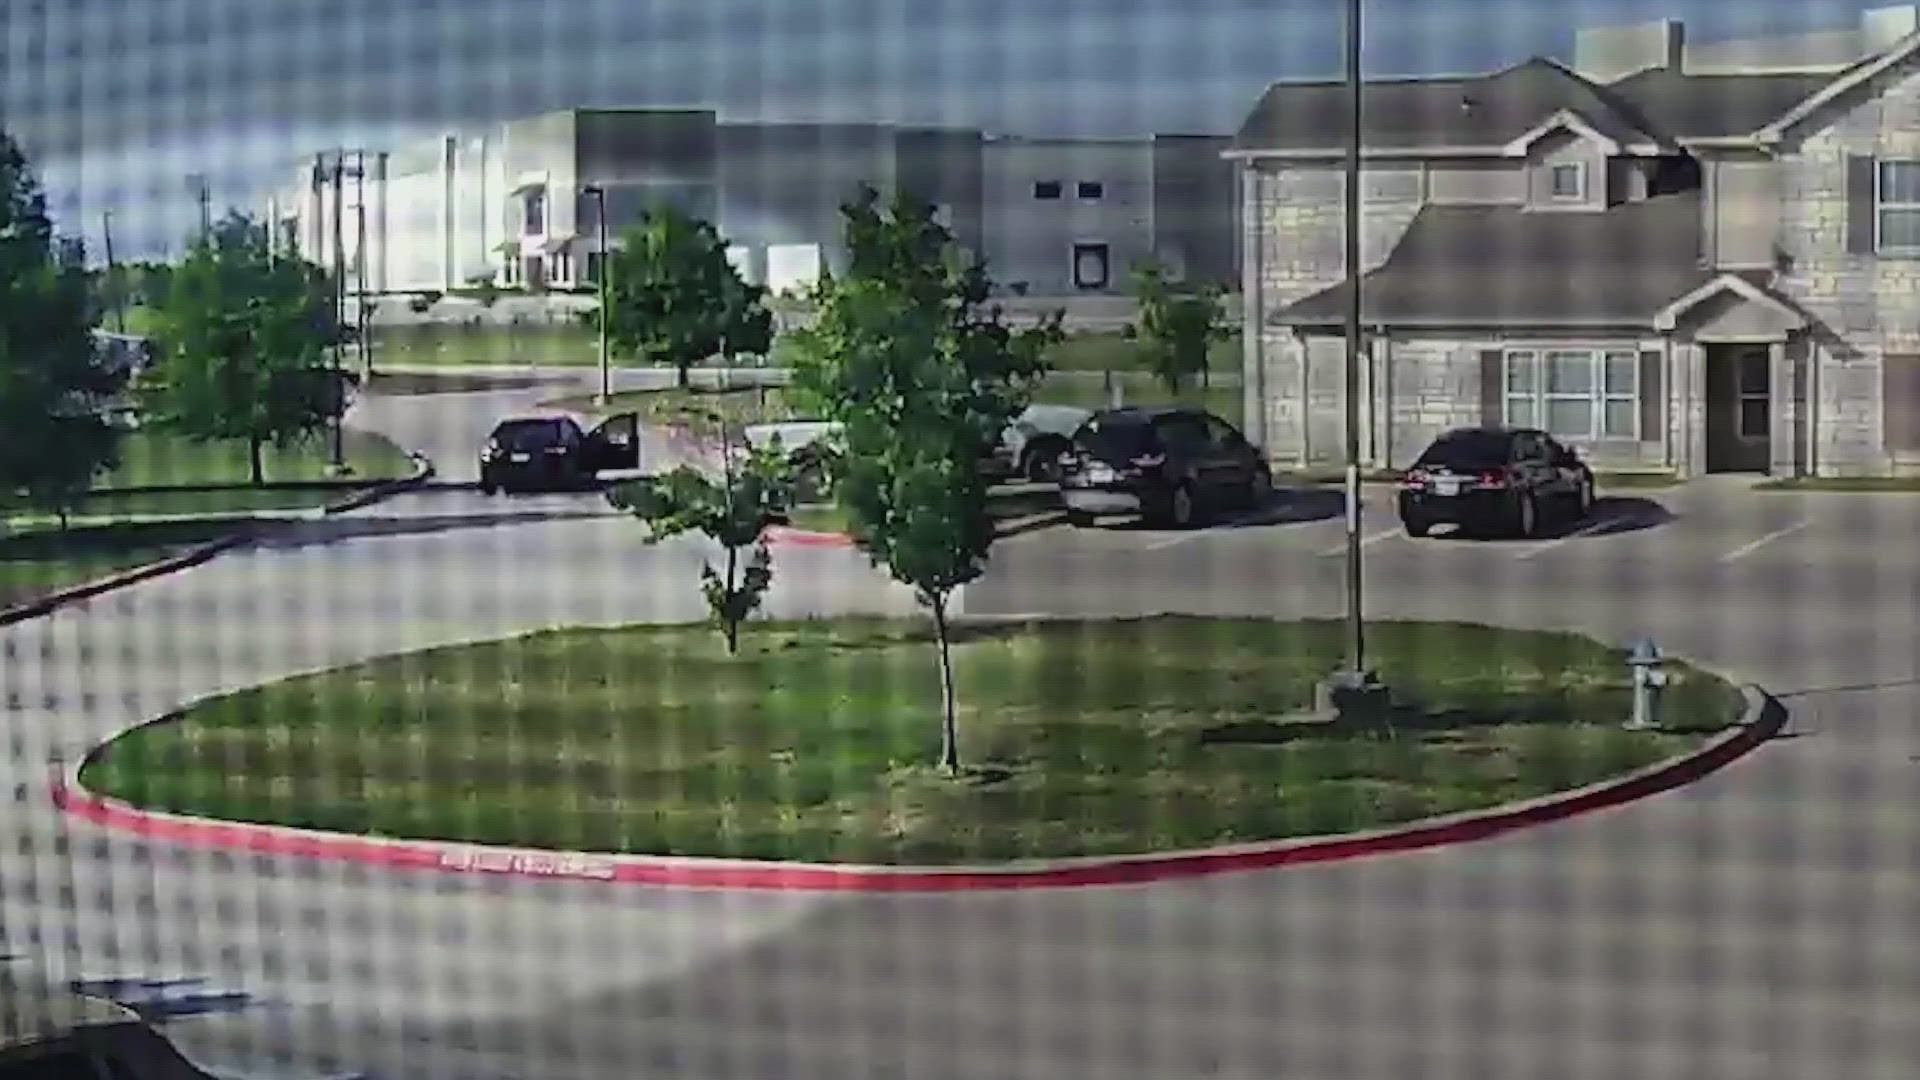 Police in the Dallas County city of Sunnyvale are hoping to find the suspect vehicle involved.